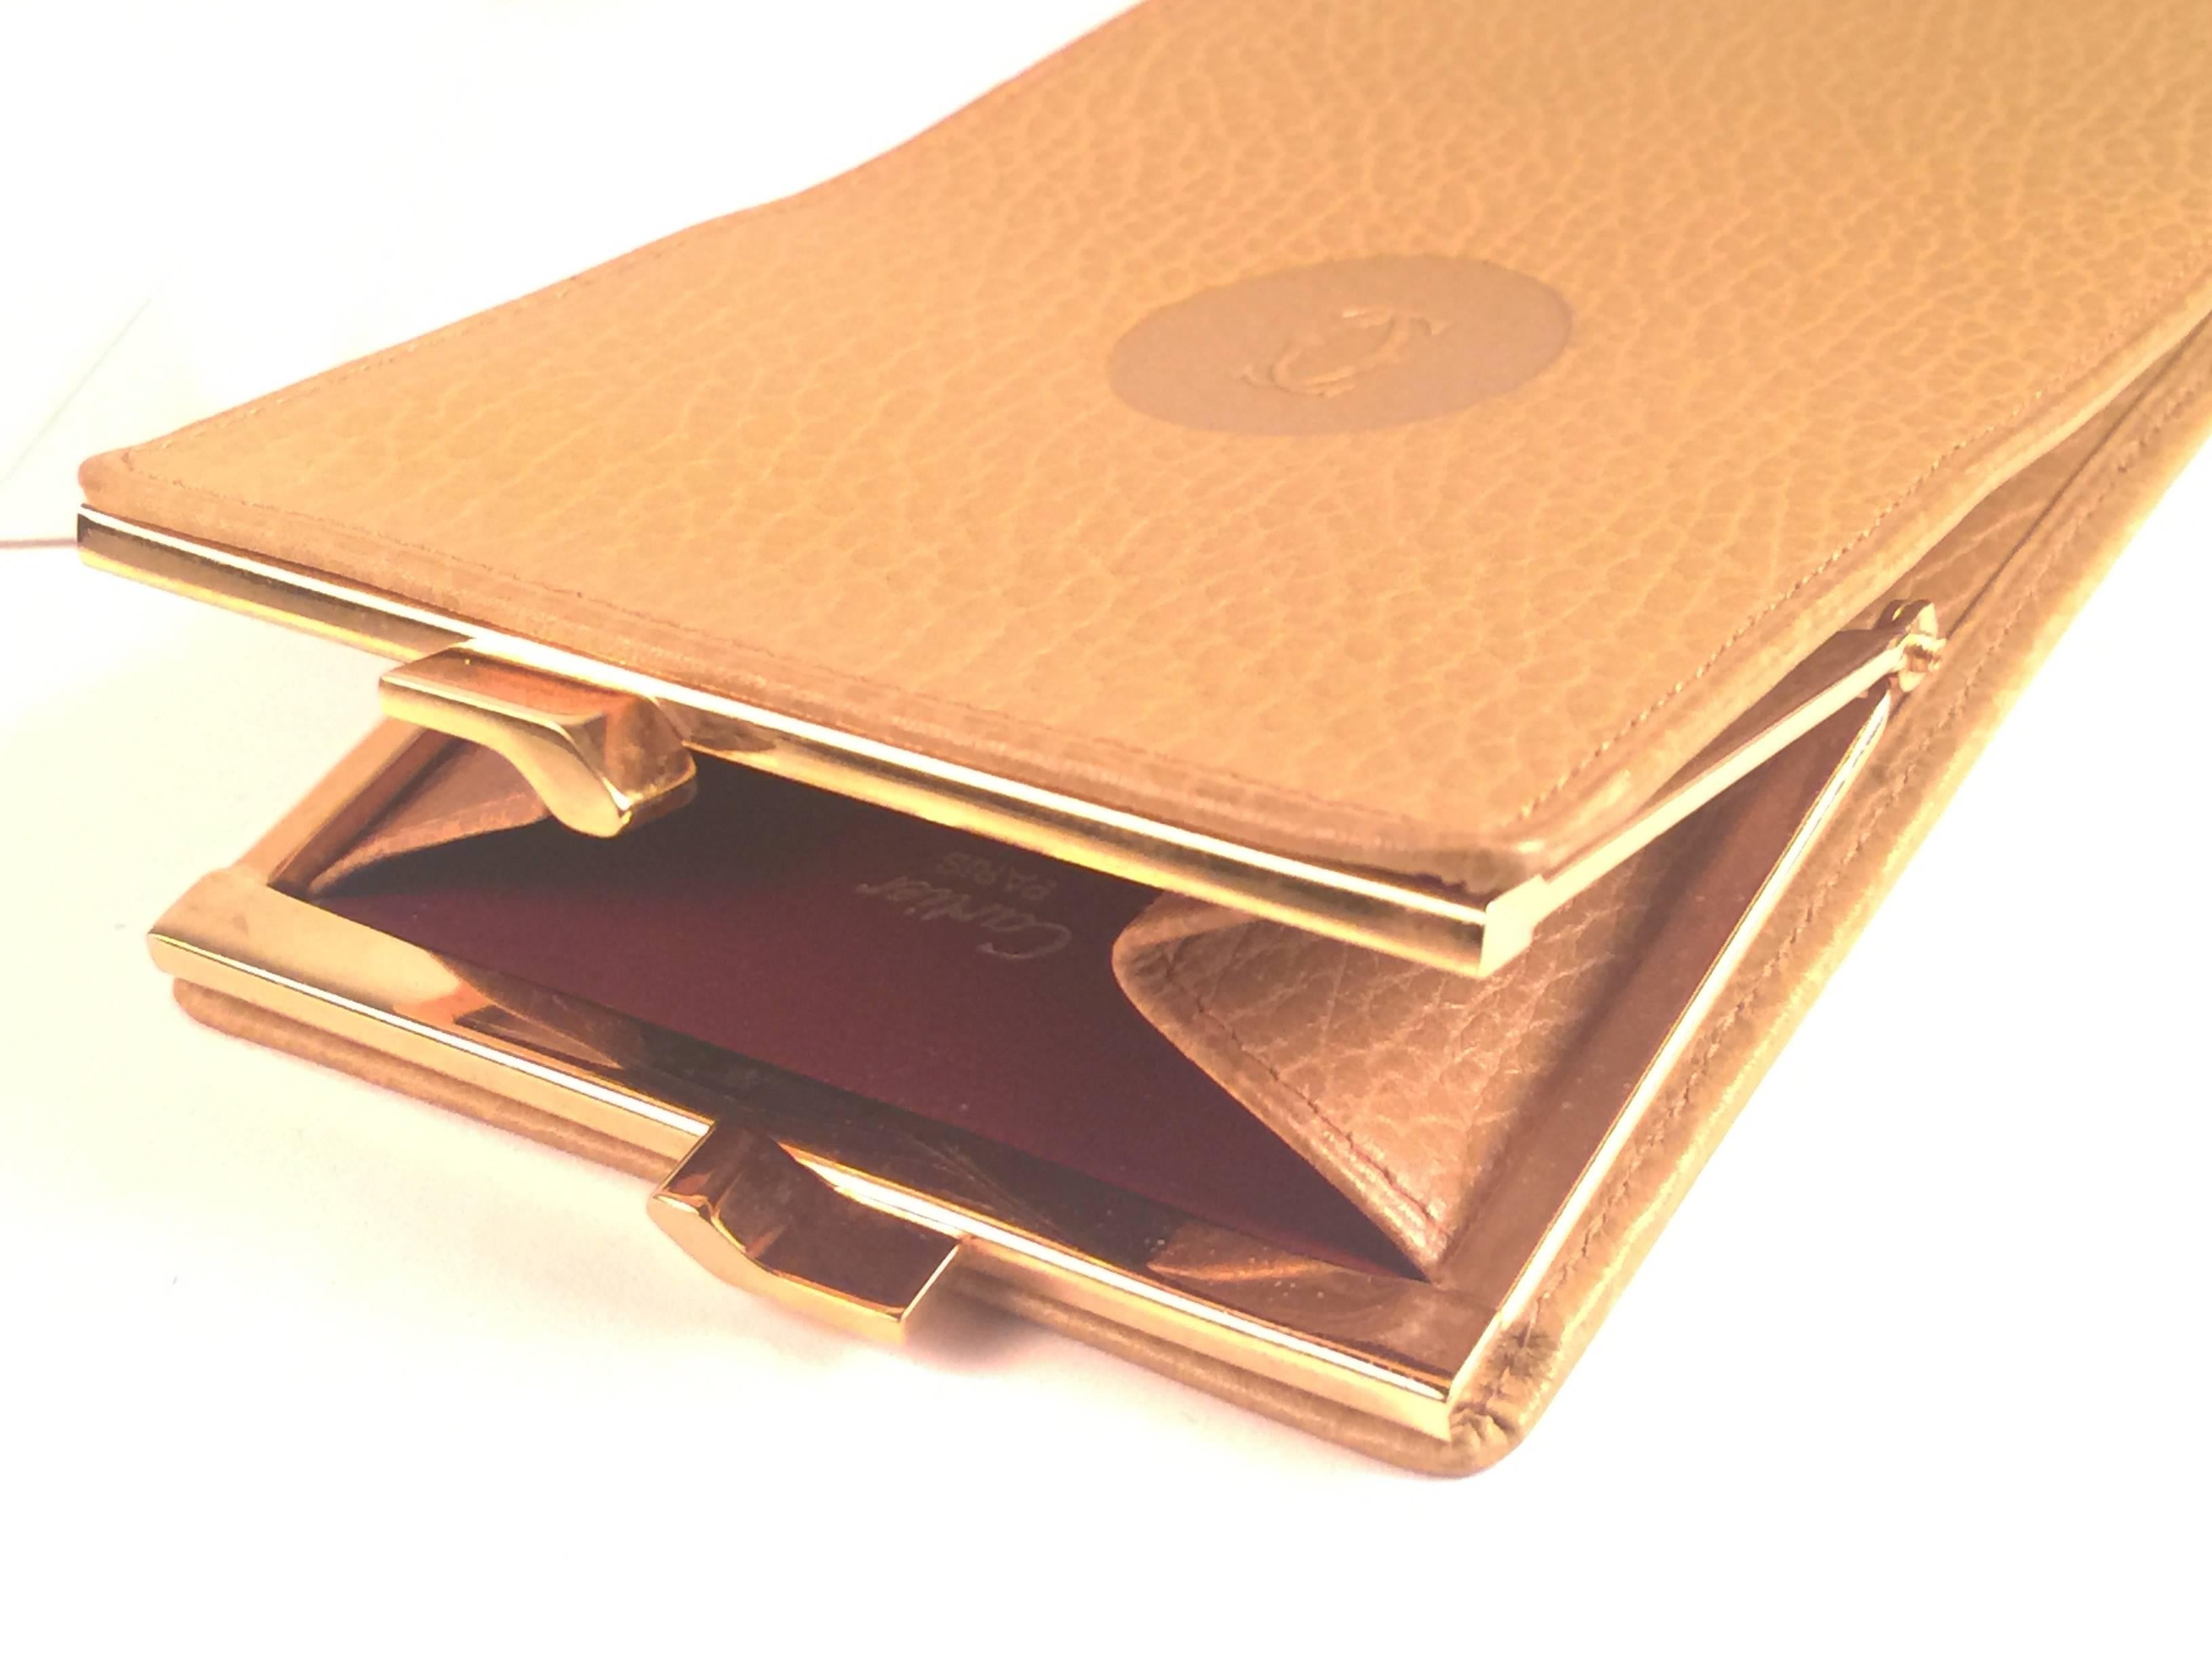 New Vintage Cartier Etui Sunglasses Case Gold & Genuine Leather  In New Condition For Sale In Baleares, Baleares